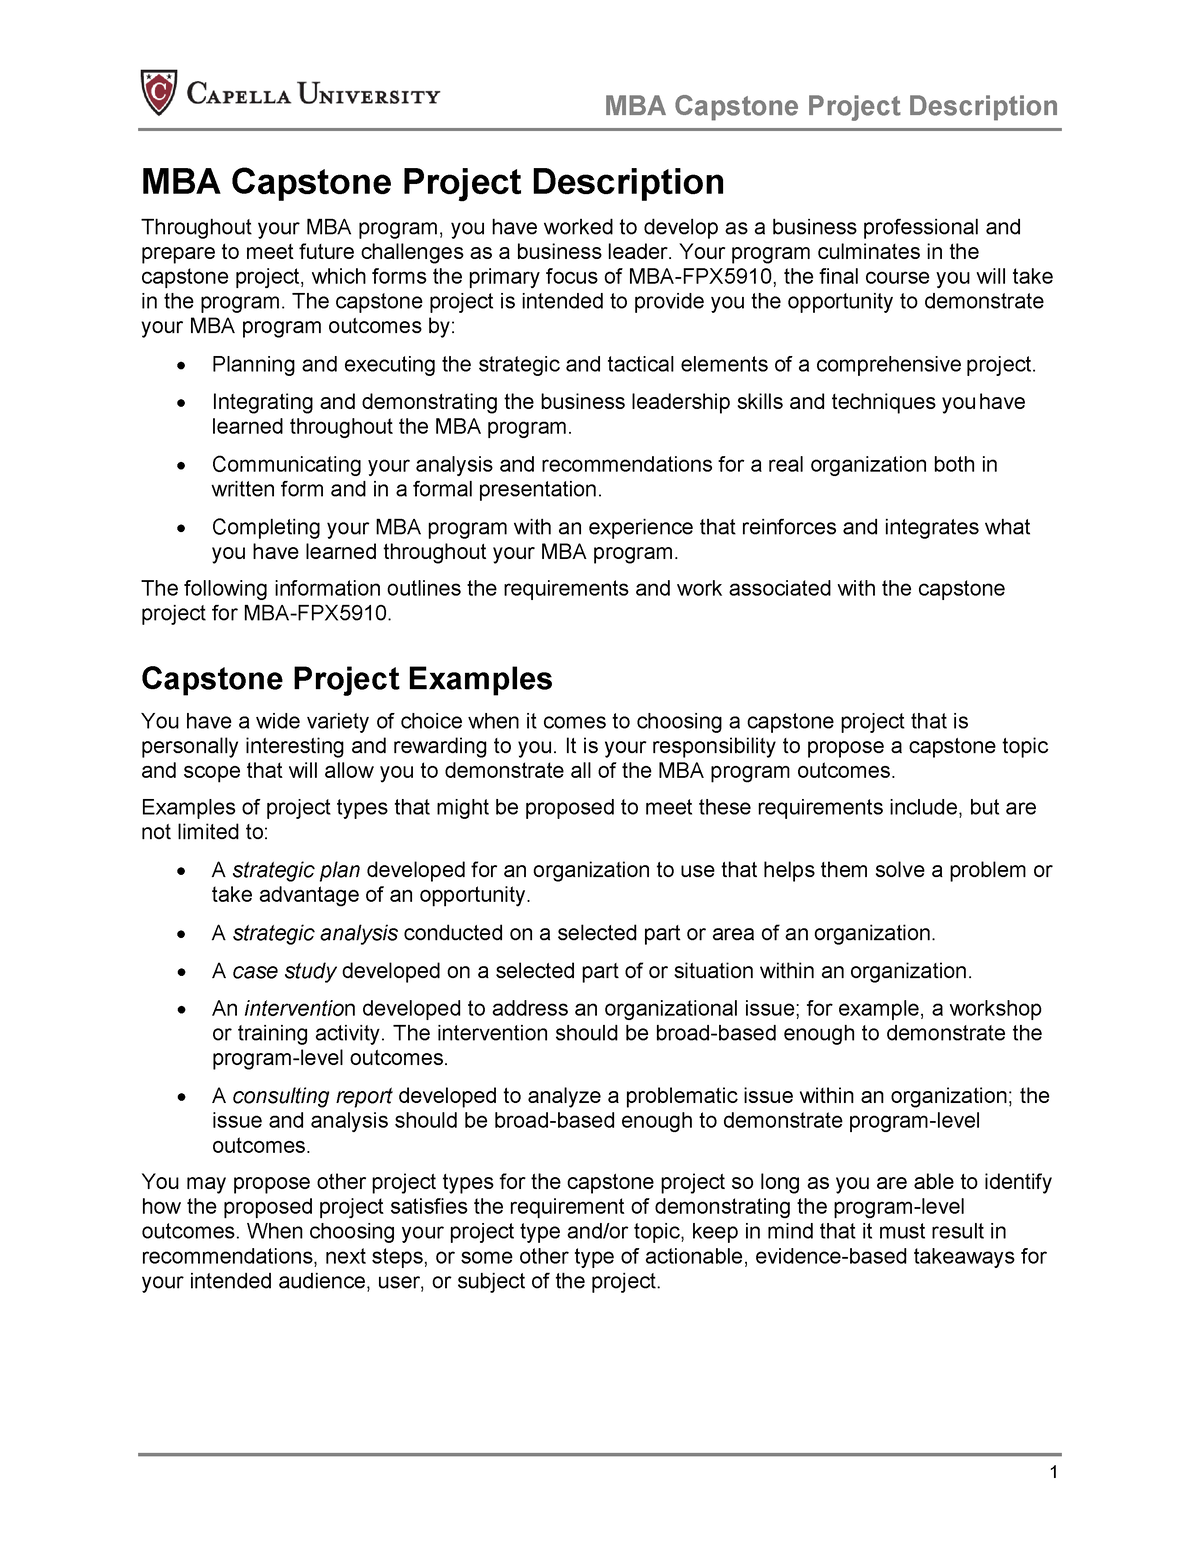 capstone project report template